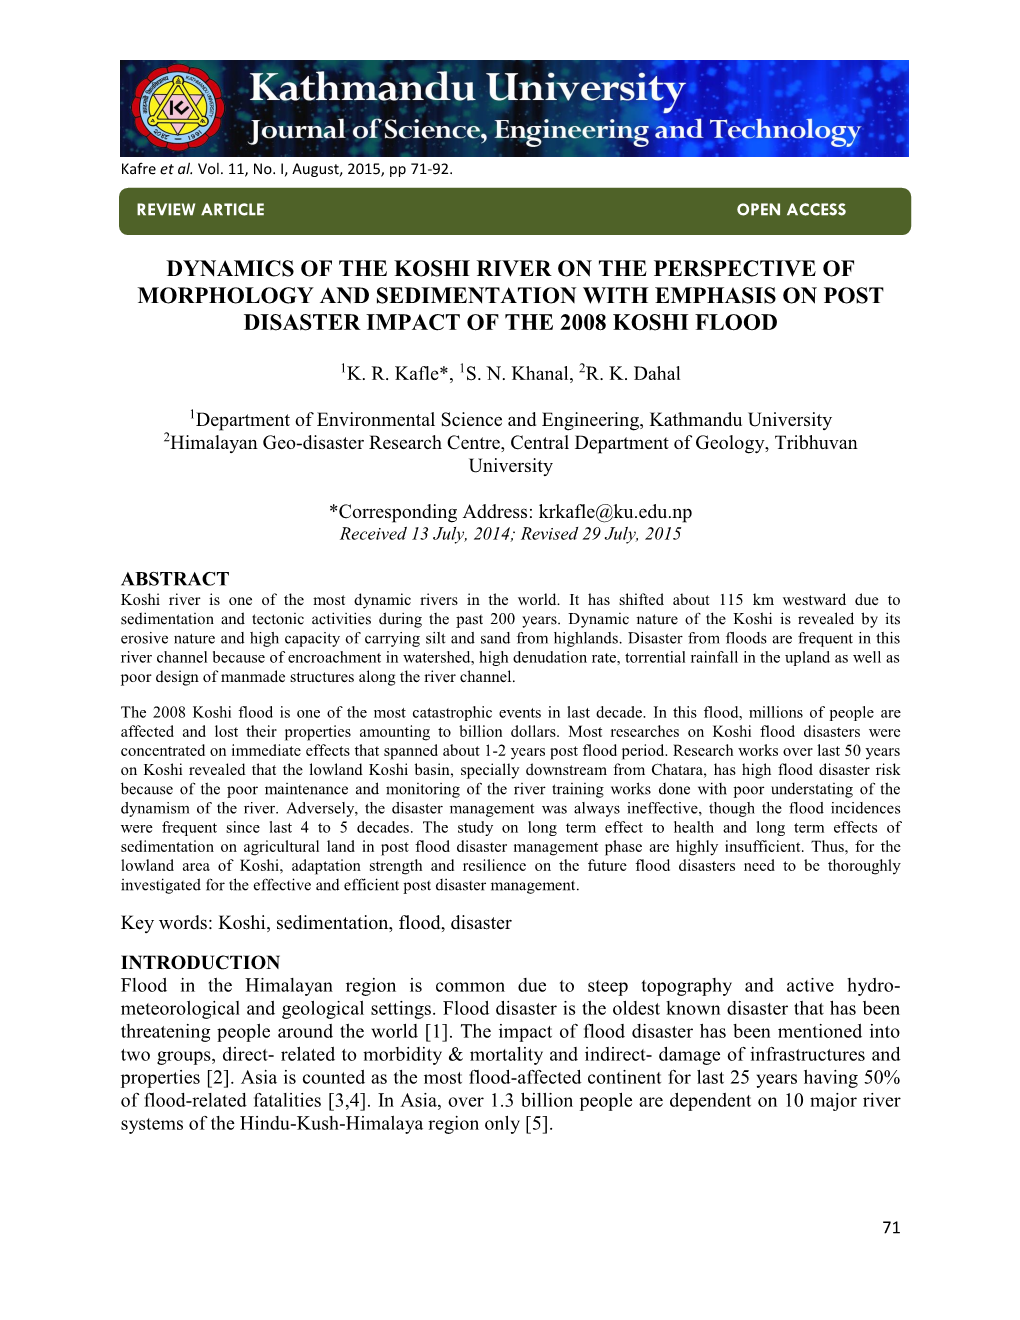 Dynamics of the Koshi River on the Perspective of Morphology and Sedimentation with Emphasis on Post Disaster Impact of the 2008 Koshi Flood